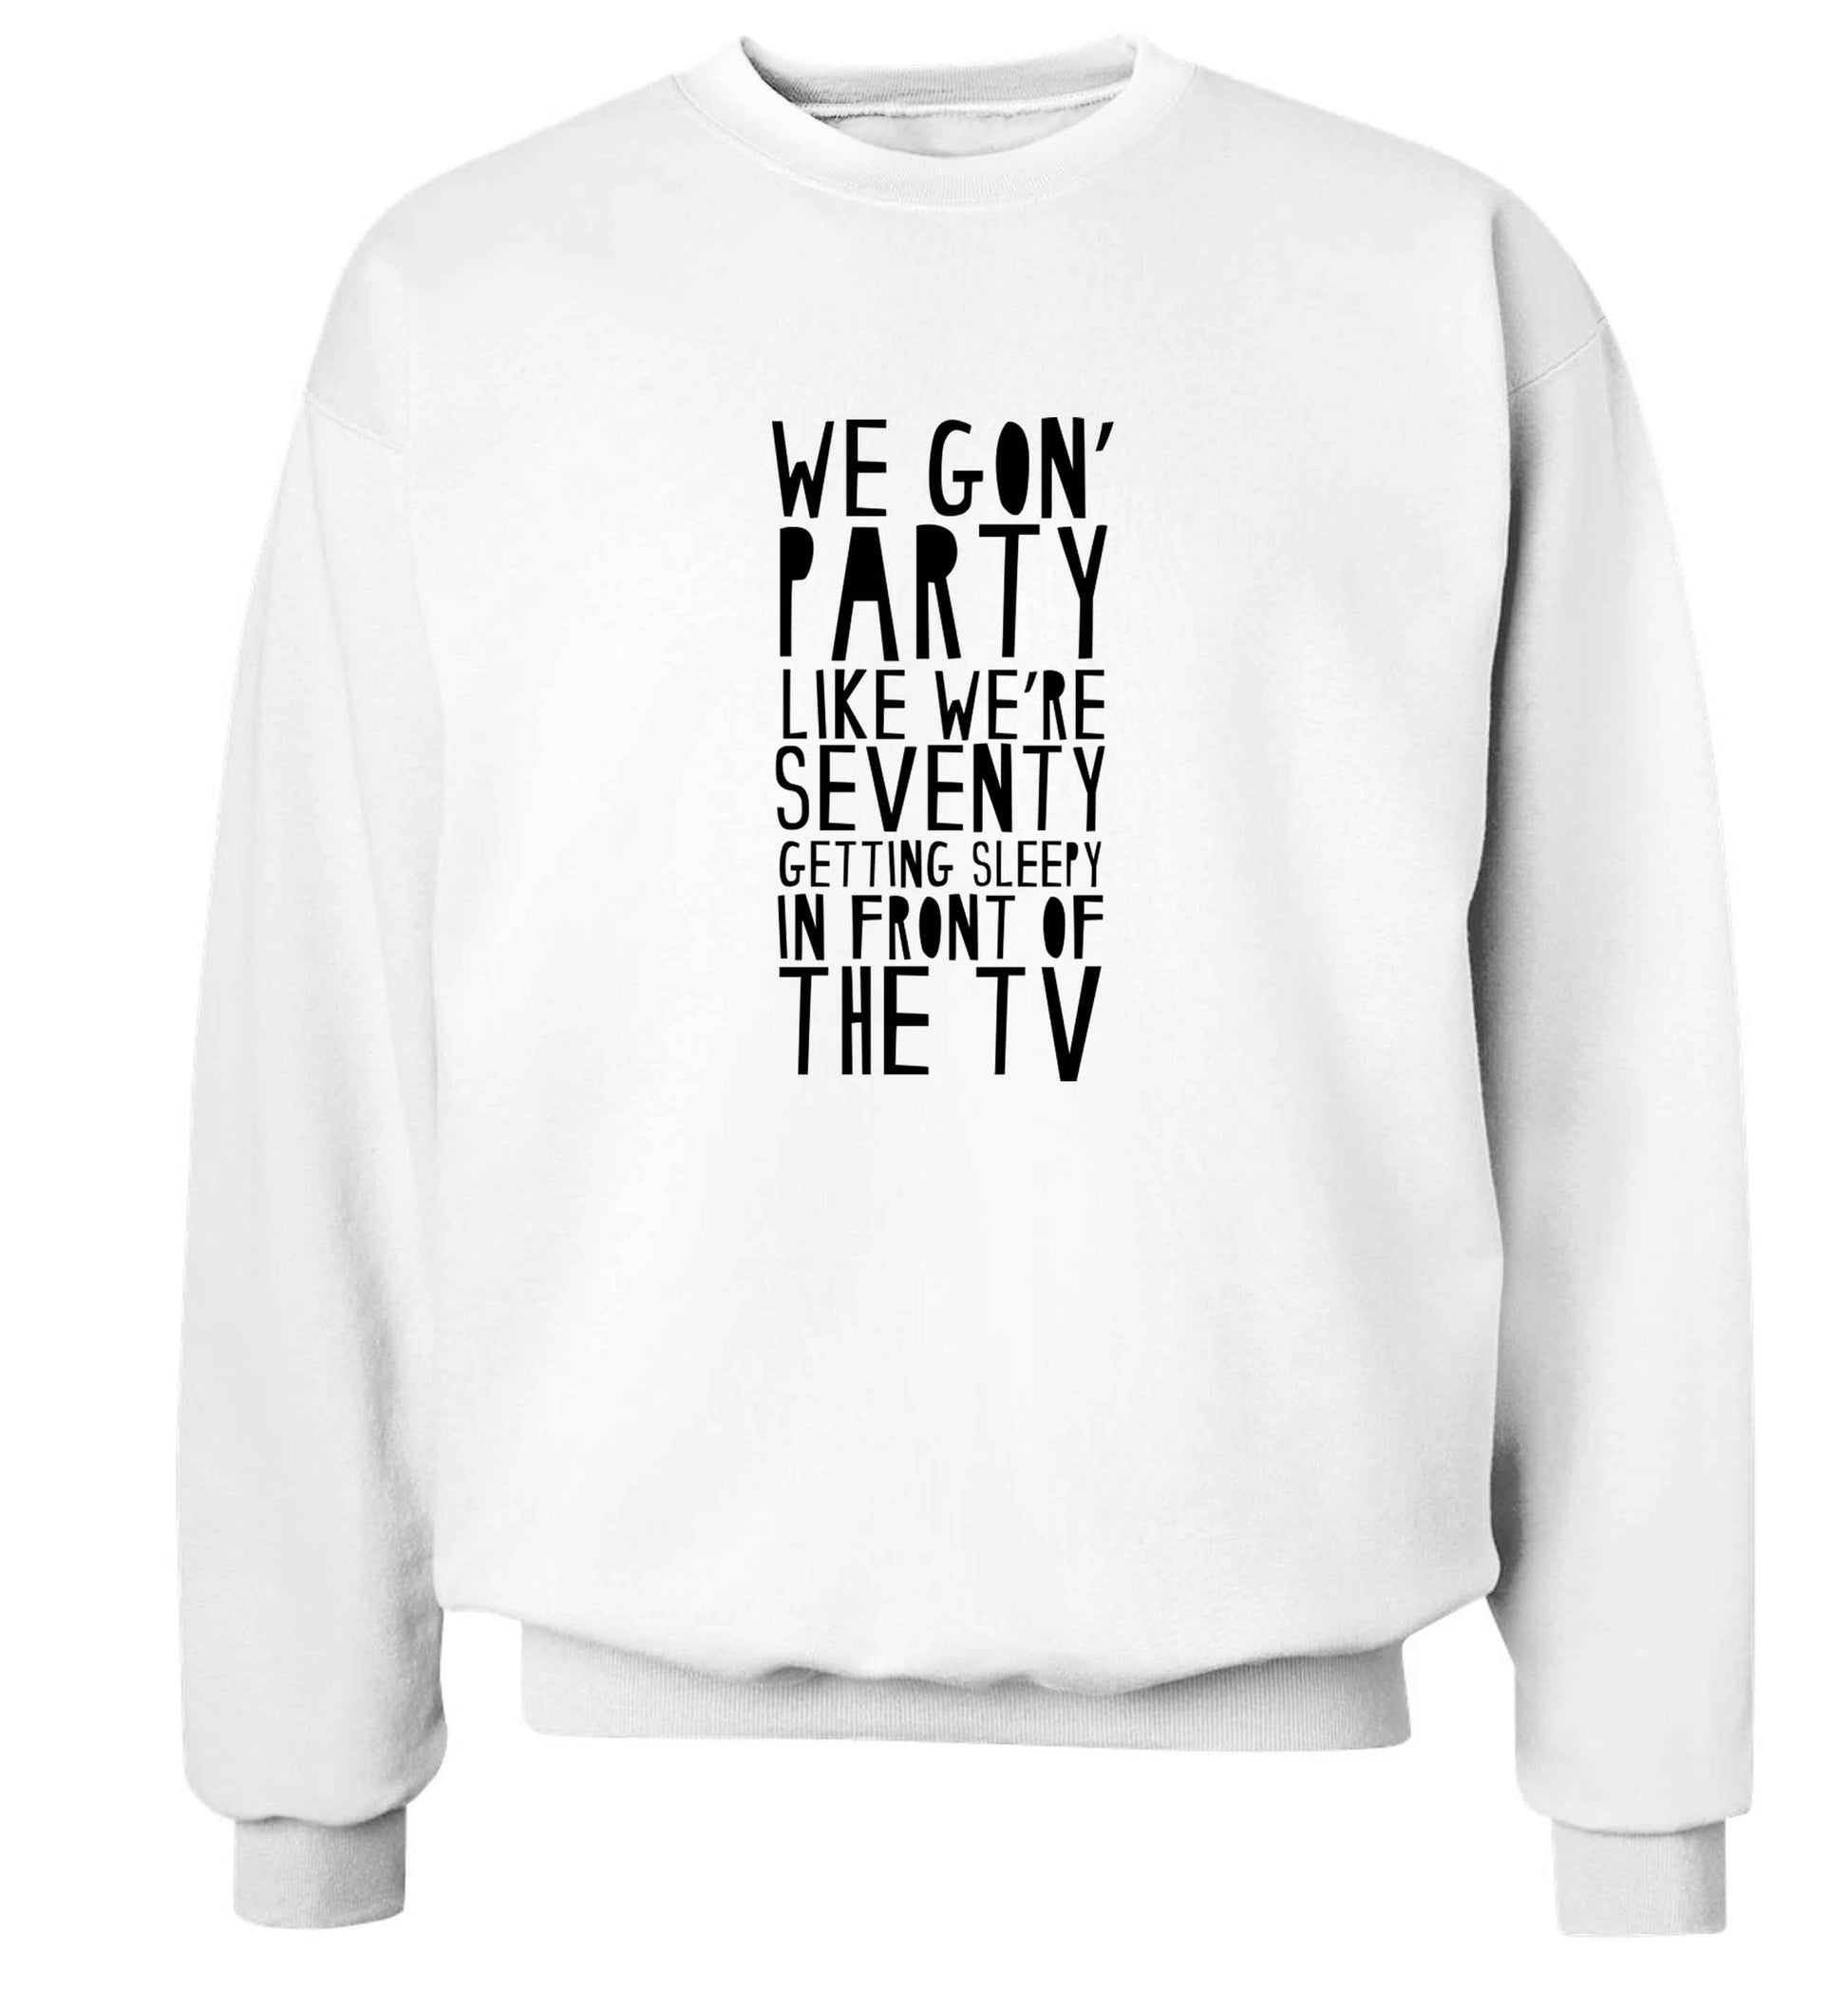 We gon' party like we're seventy getting sleepy in front of the TV adult's unisex white sweater 2XL